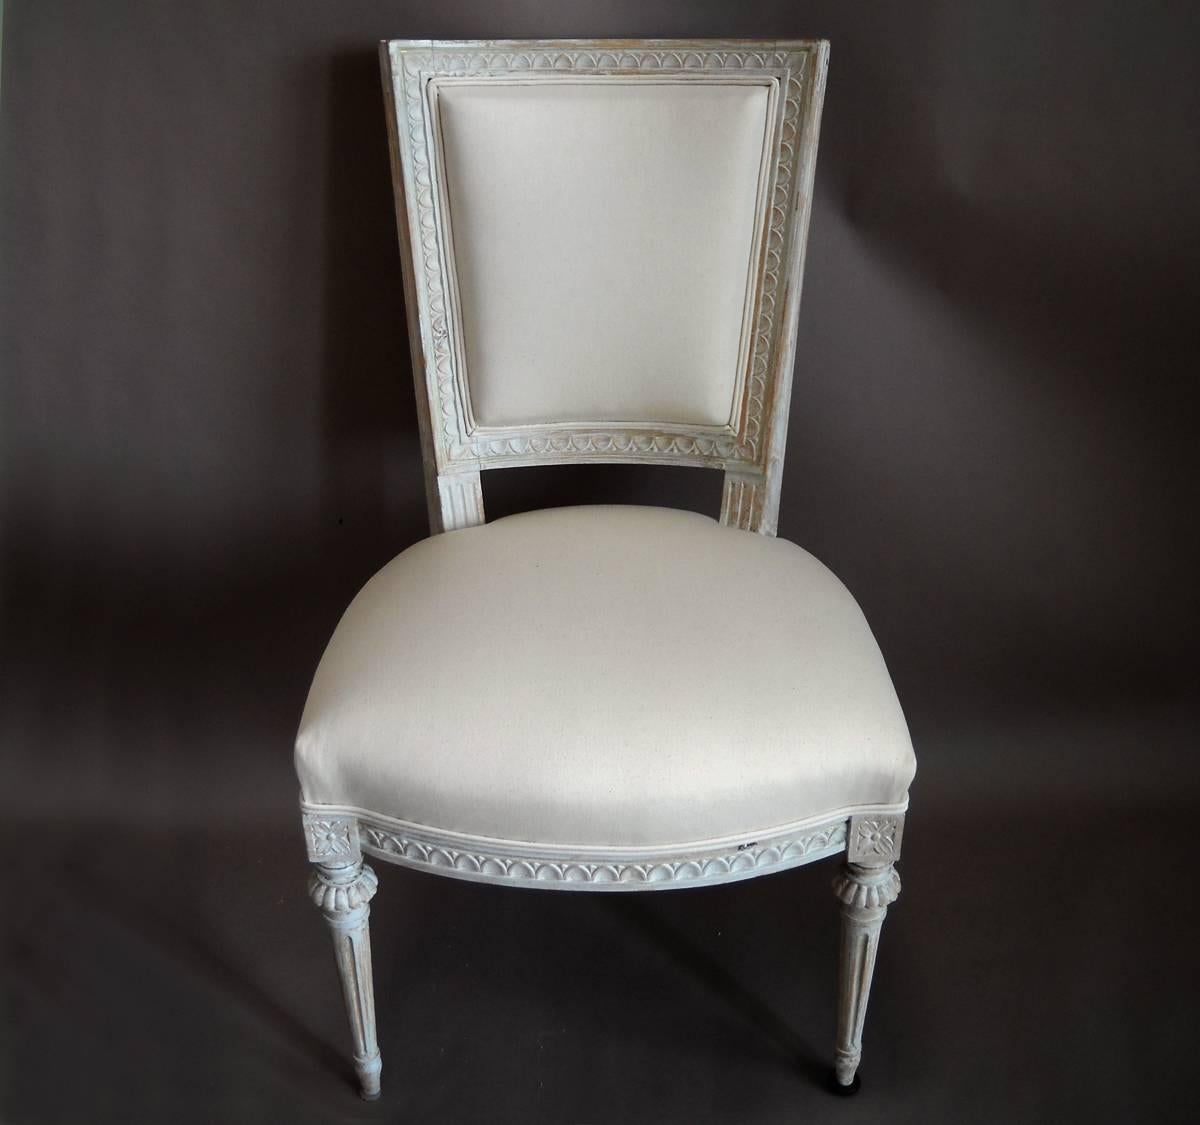 Pair of side chairs, Sweden, circa 1880, with squared backs. Egg and dart molding around the back and seat, with corner blocks carved with rosettes. Newly upholstered in high quality muslin.